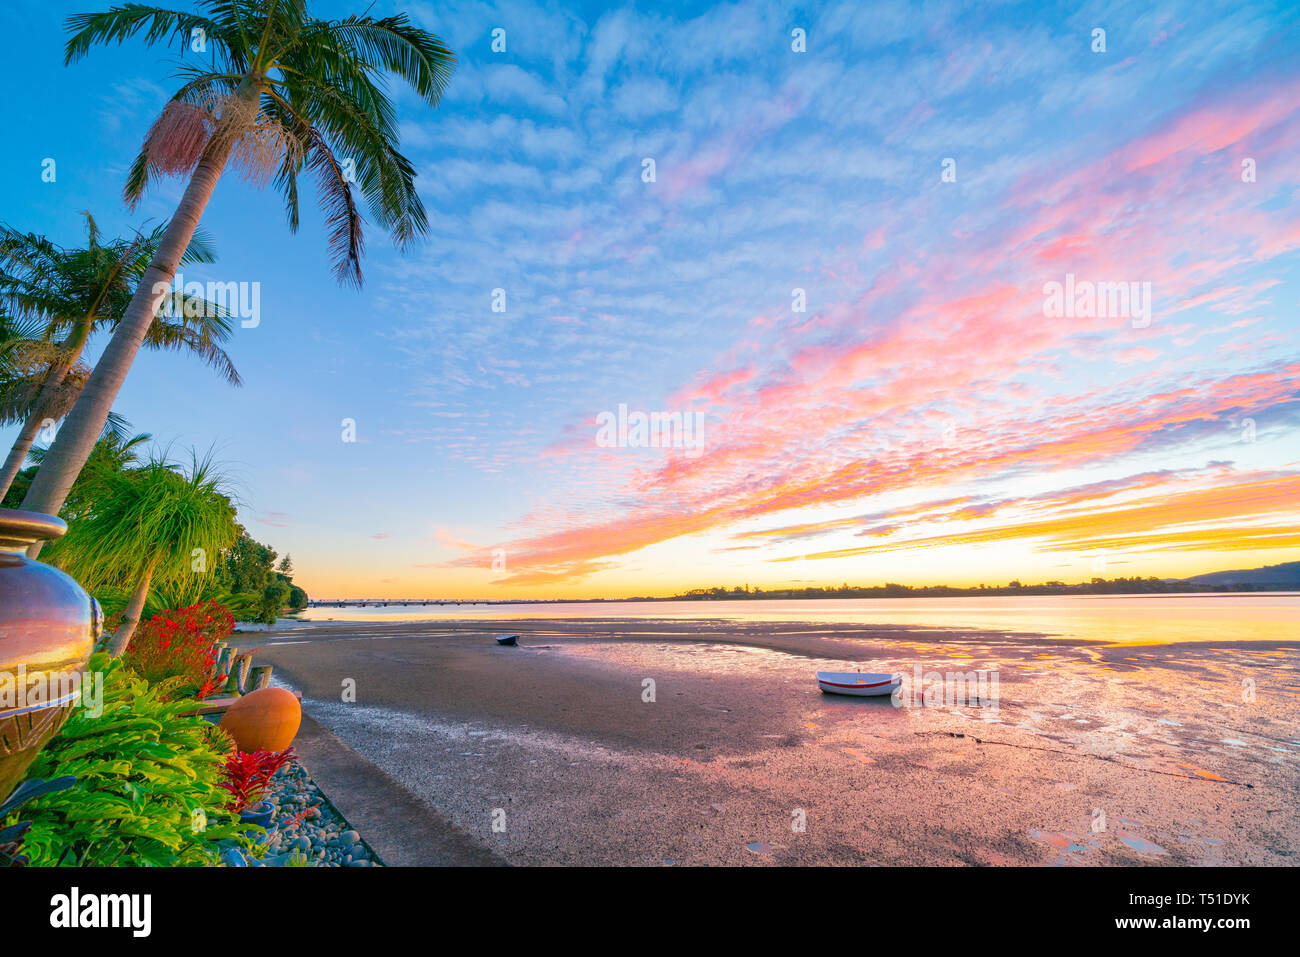 Brilliant sunset on harbor edge with striking cloud formations over tropical gardens and beach at low tide Tauranga New Zealand Stock Photo